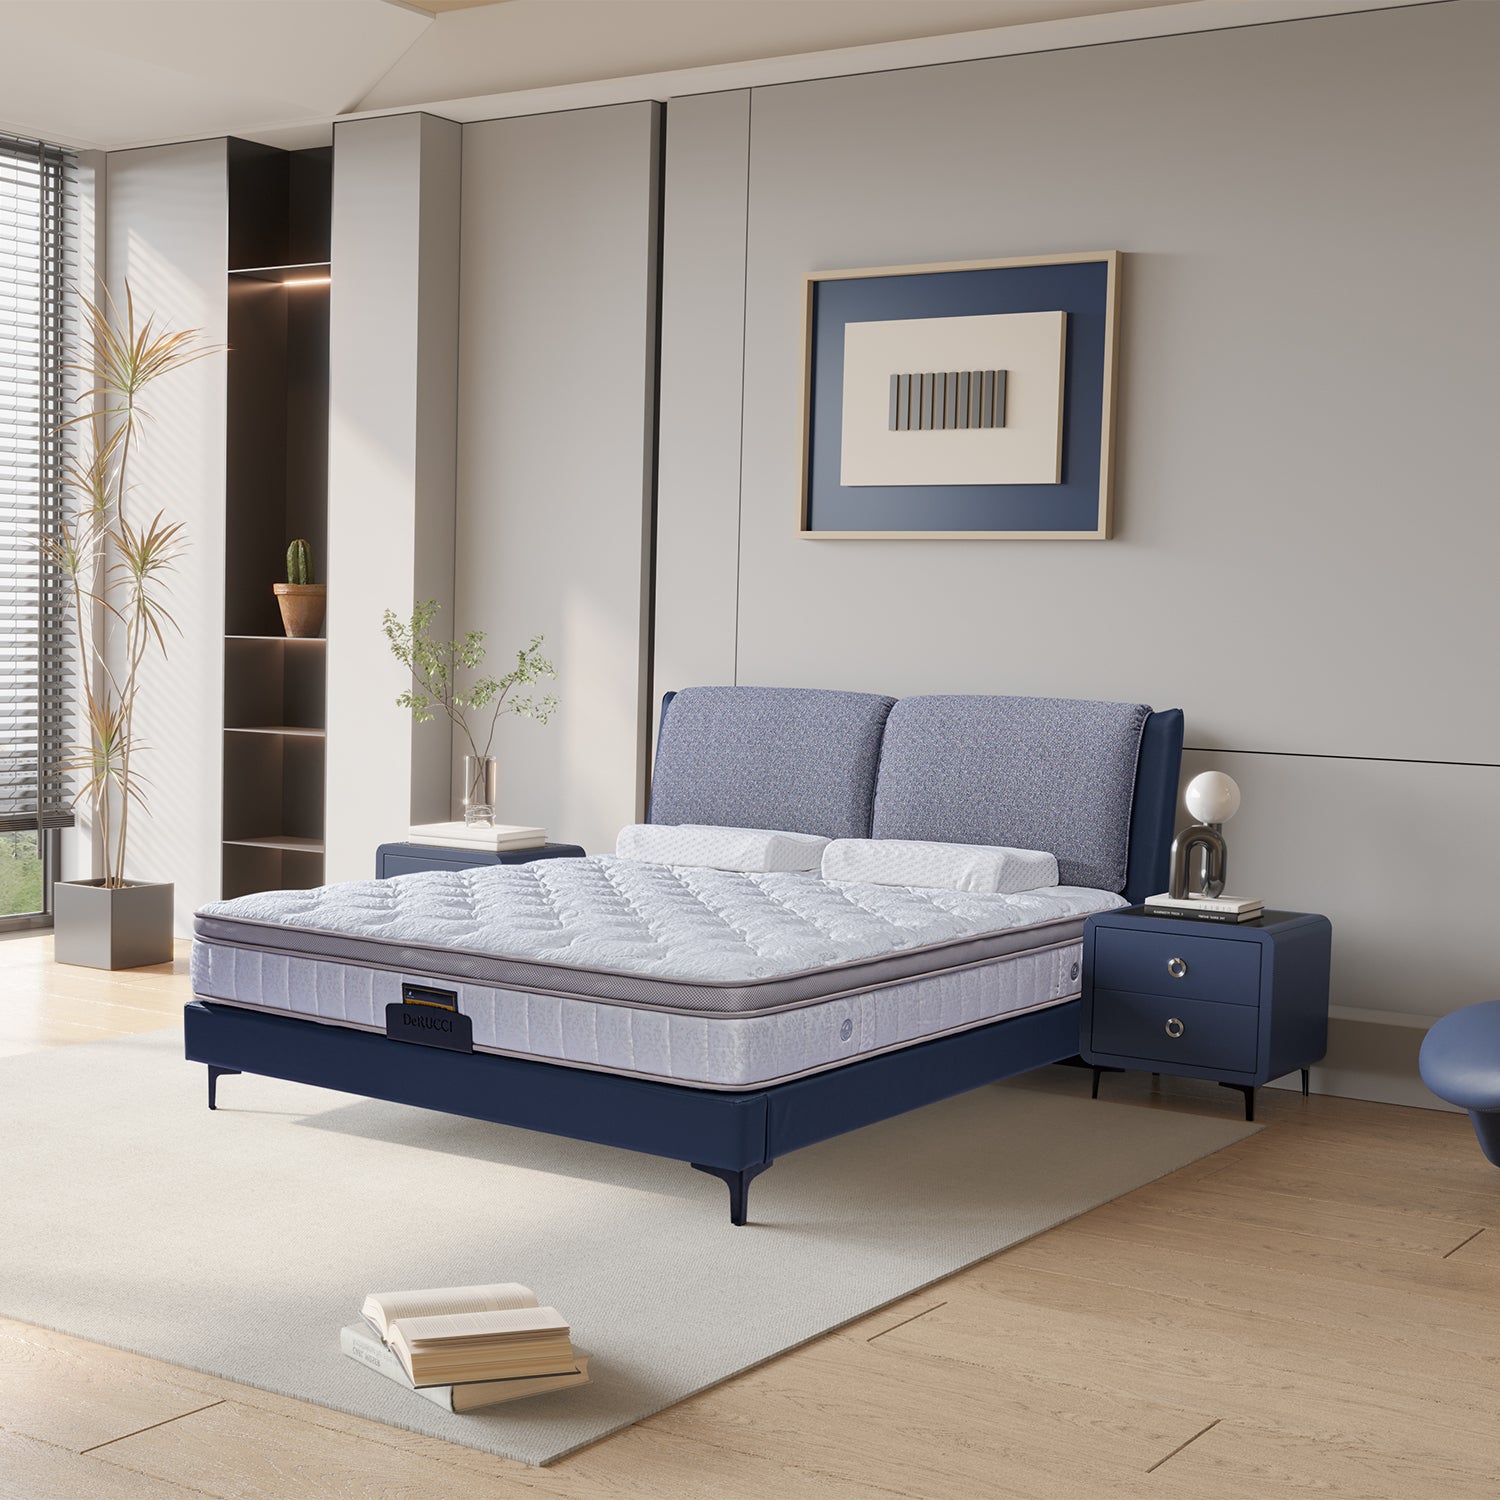 DeRUCCI BOC1-017 bed frame with blue fabric headboard and white mattress in a modern bedroom with blue nightstands and large windows.